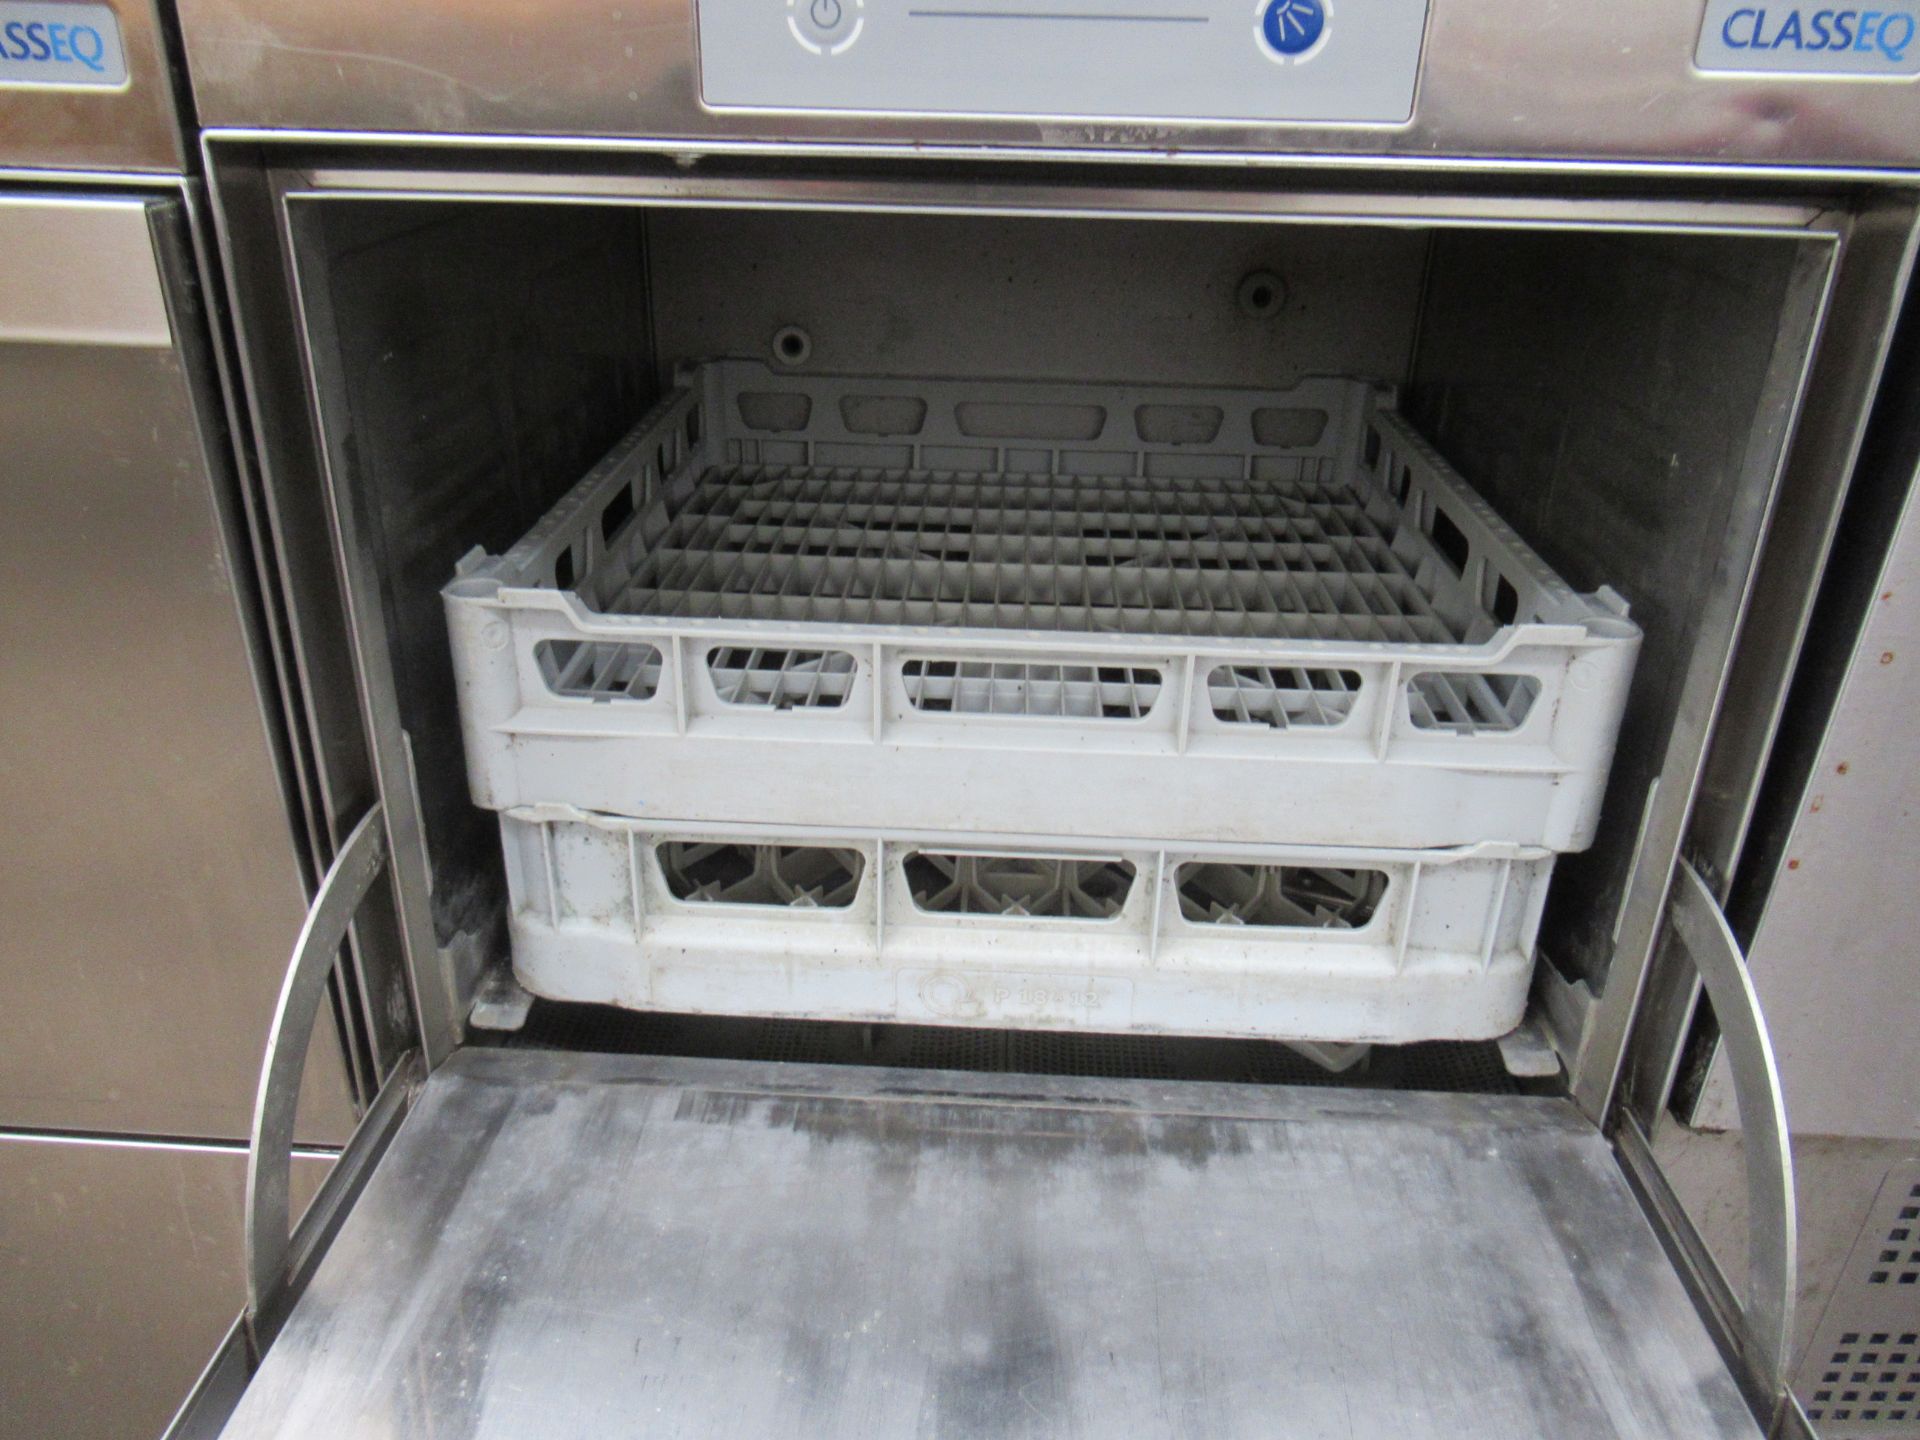 Class EQ Undercounter Glass Washer - Image 4 of 4